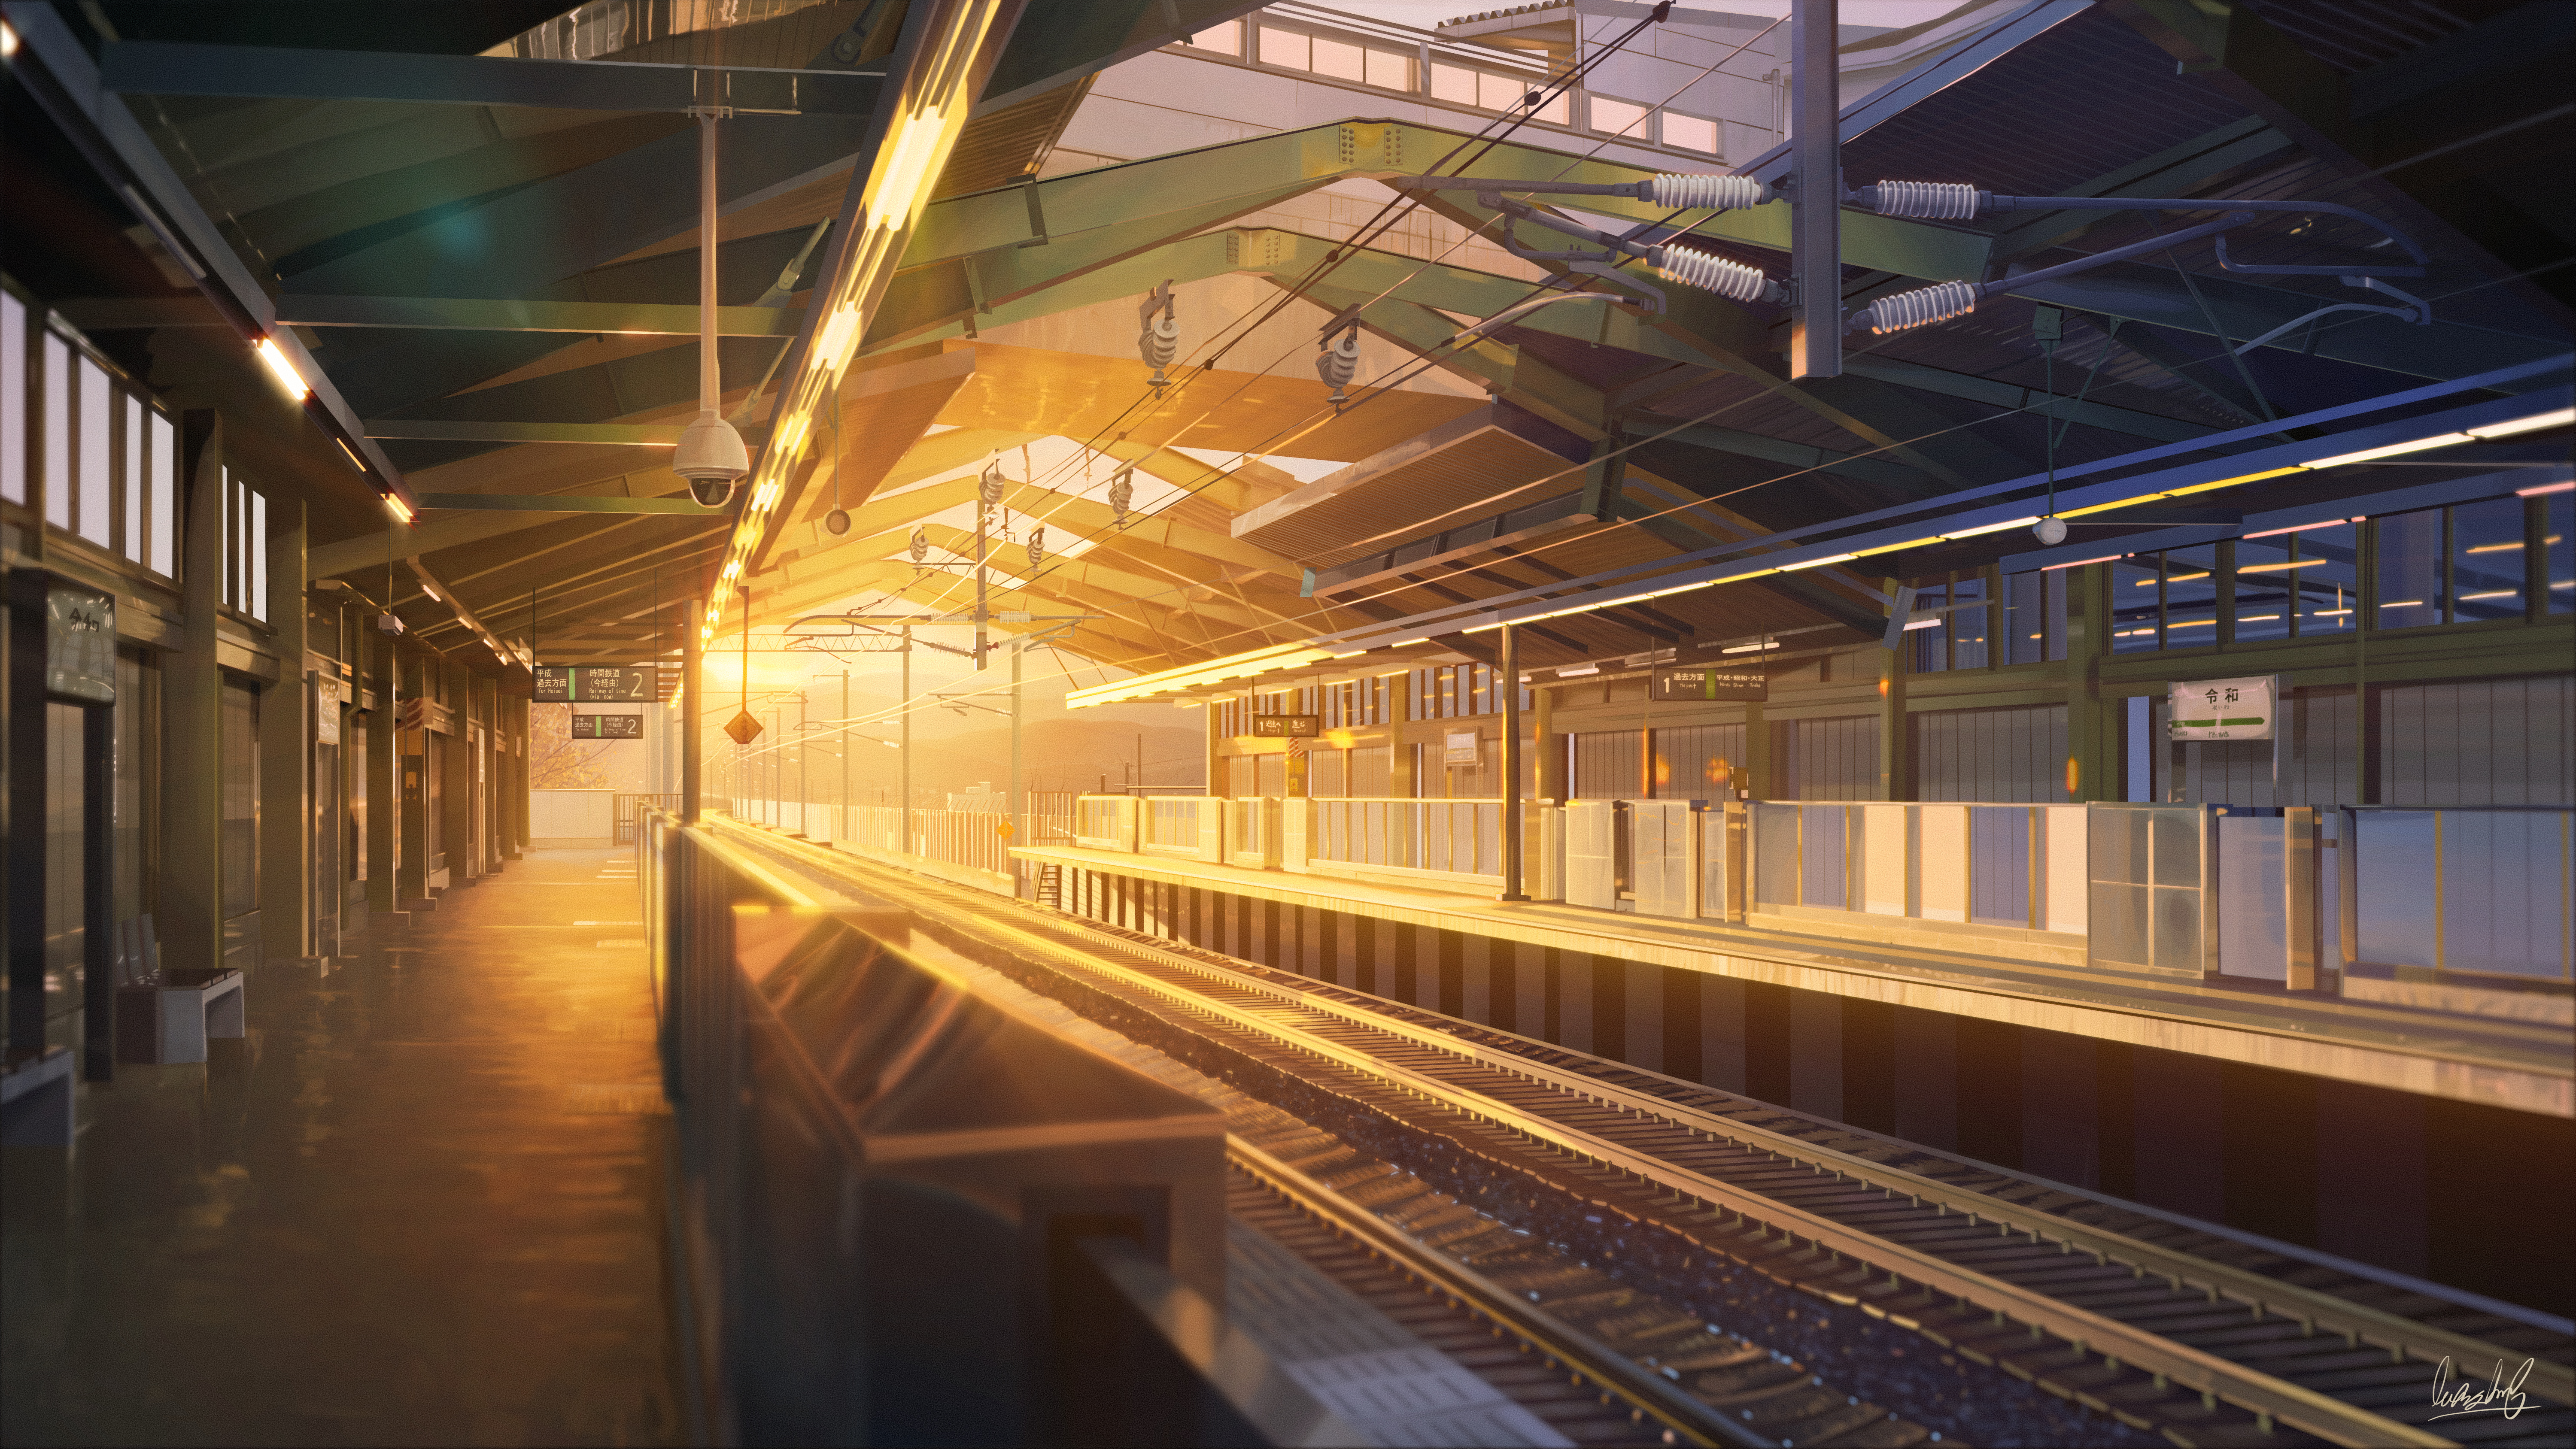 Train Station Anime 5k Hd Anime 4k Wallpapers Images Backgrounds Photos And Pictures Download this free vector about night background with train station, and discover more than 10 million professional graphic resources on freepik. hdqwalls